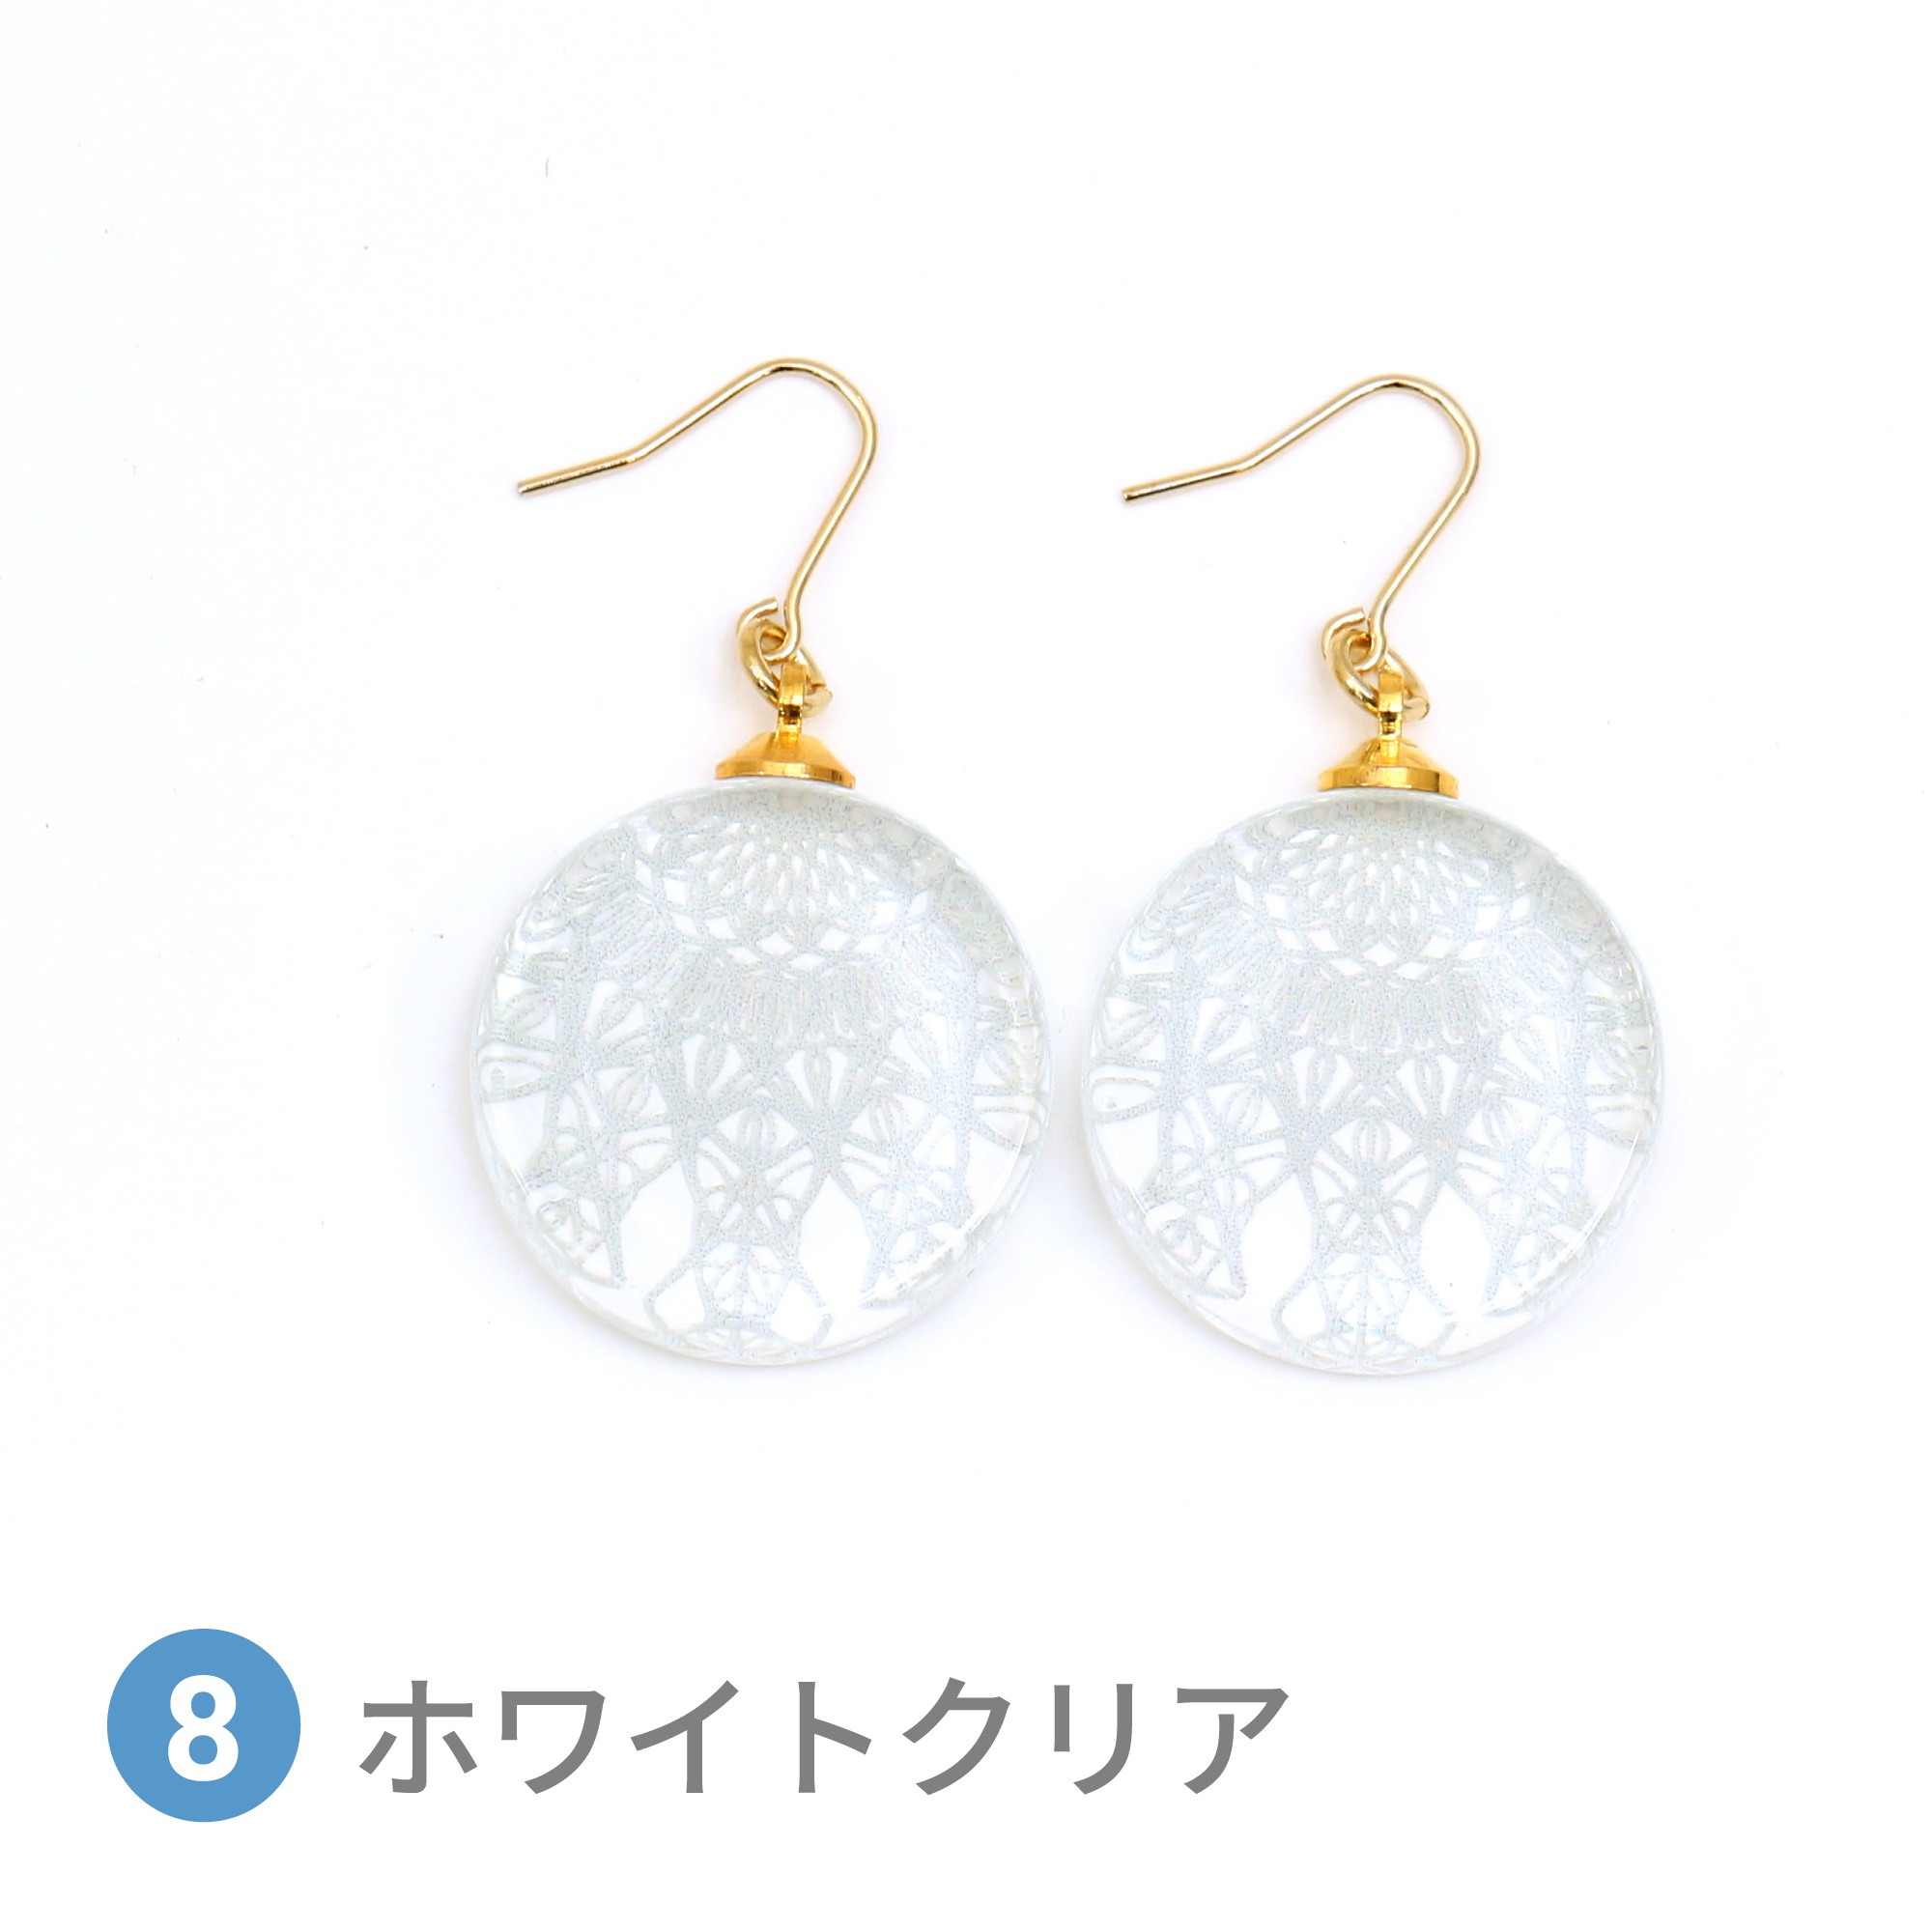 Glass accessories Pierced Earring LACE white clear round shape